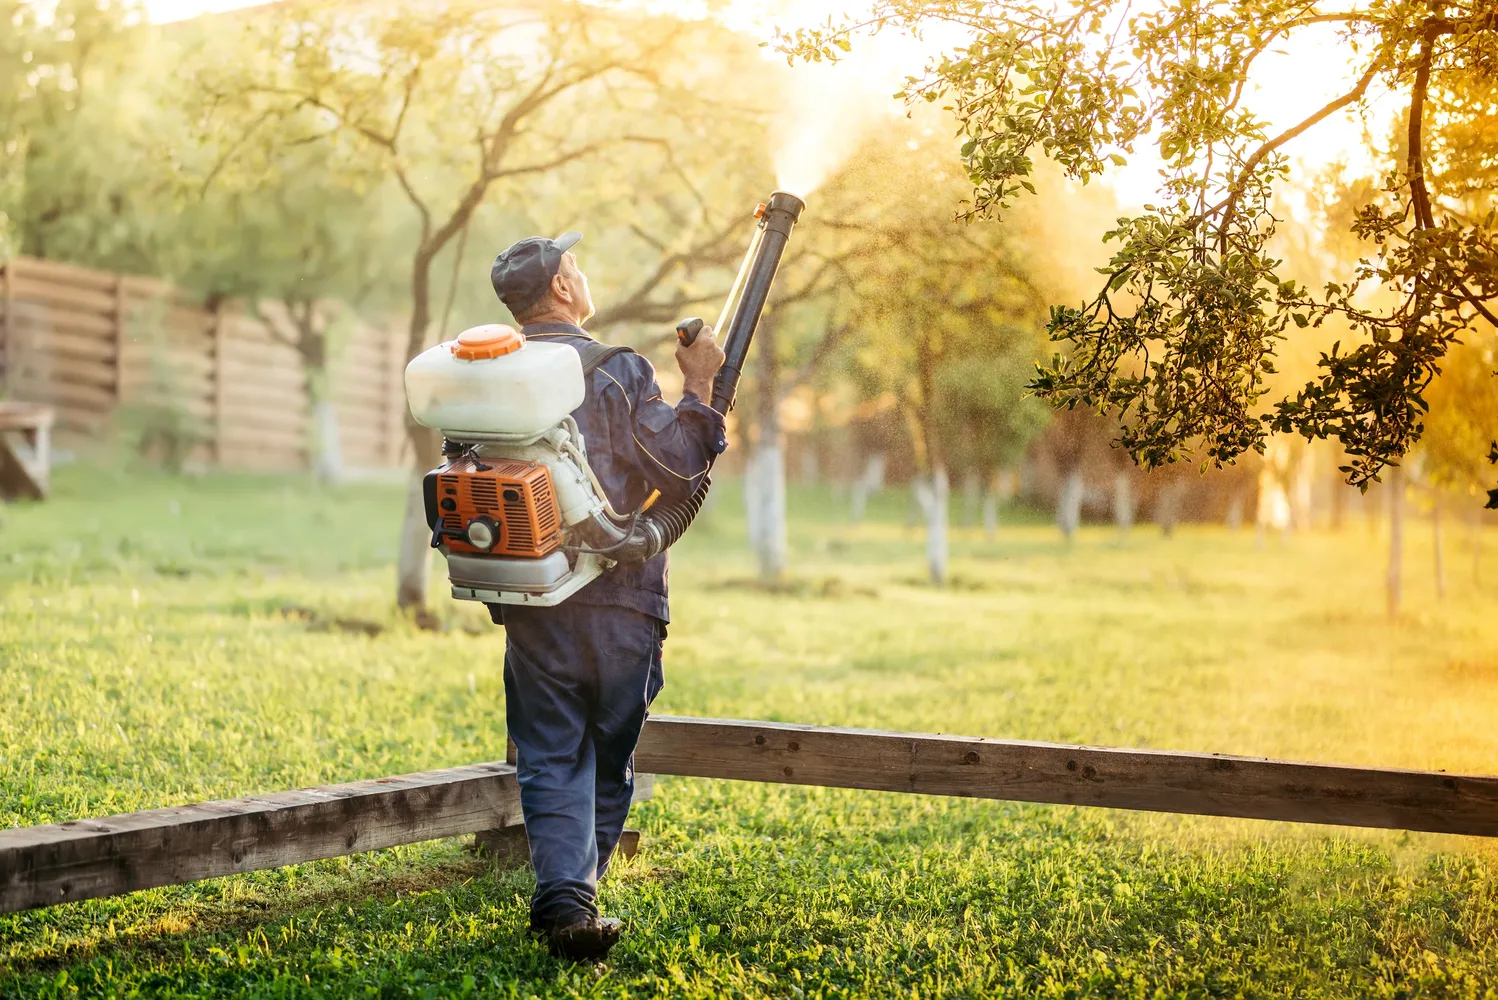 A man wearing overalls operates a pesticide sprayer in an orchard, targeting the upper branches of a tree.